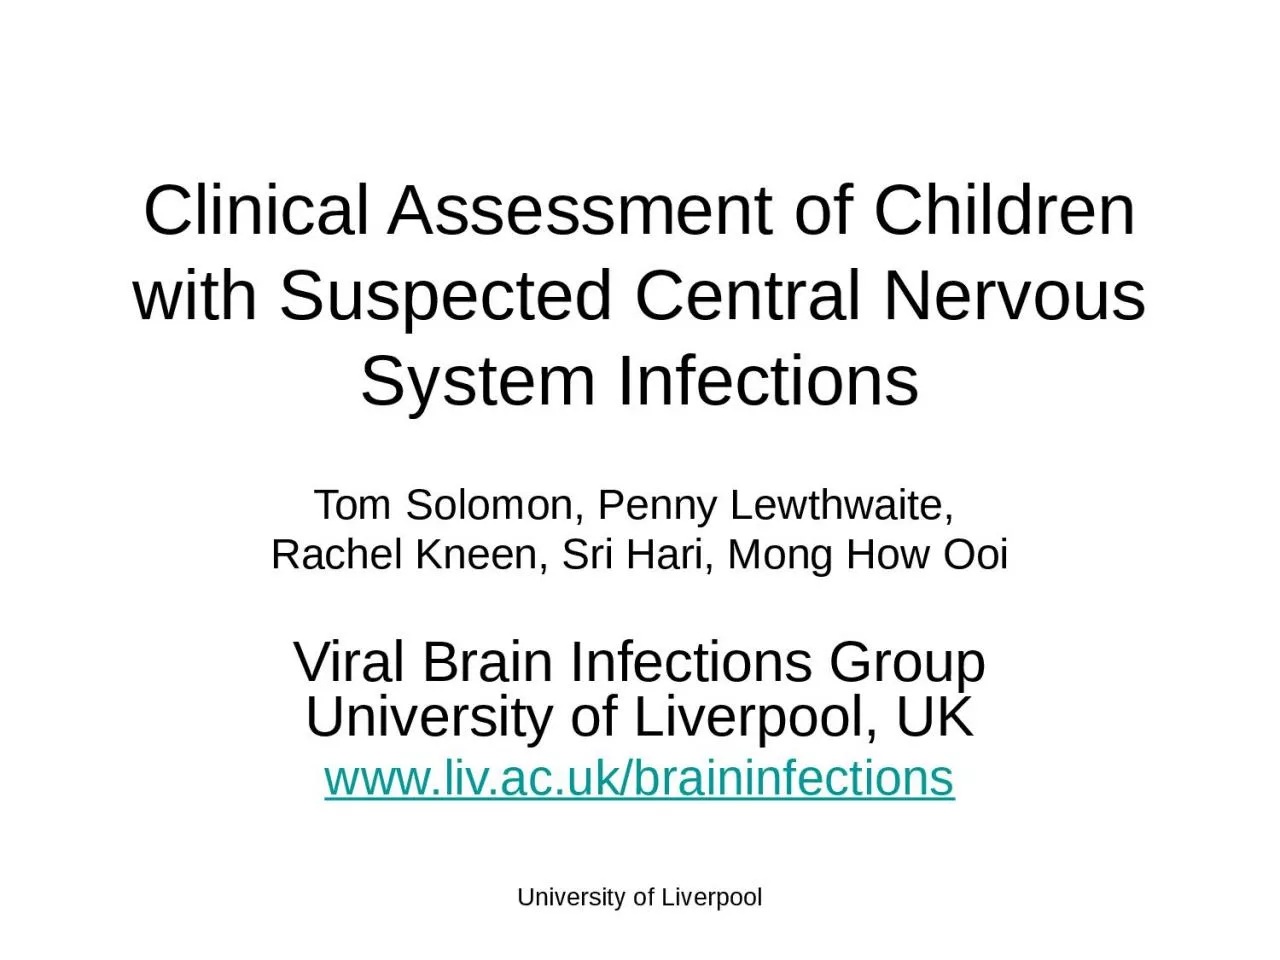 University of Liverpool Clinical Assessment of Children with Suspected Central Nervous